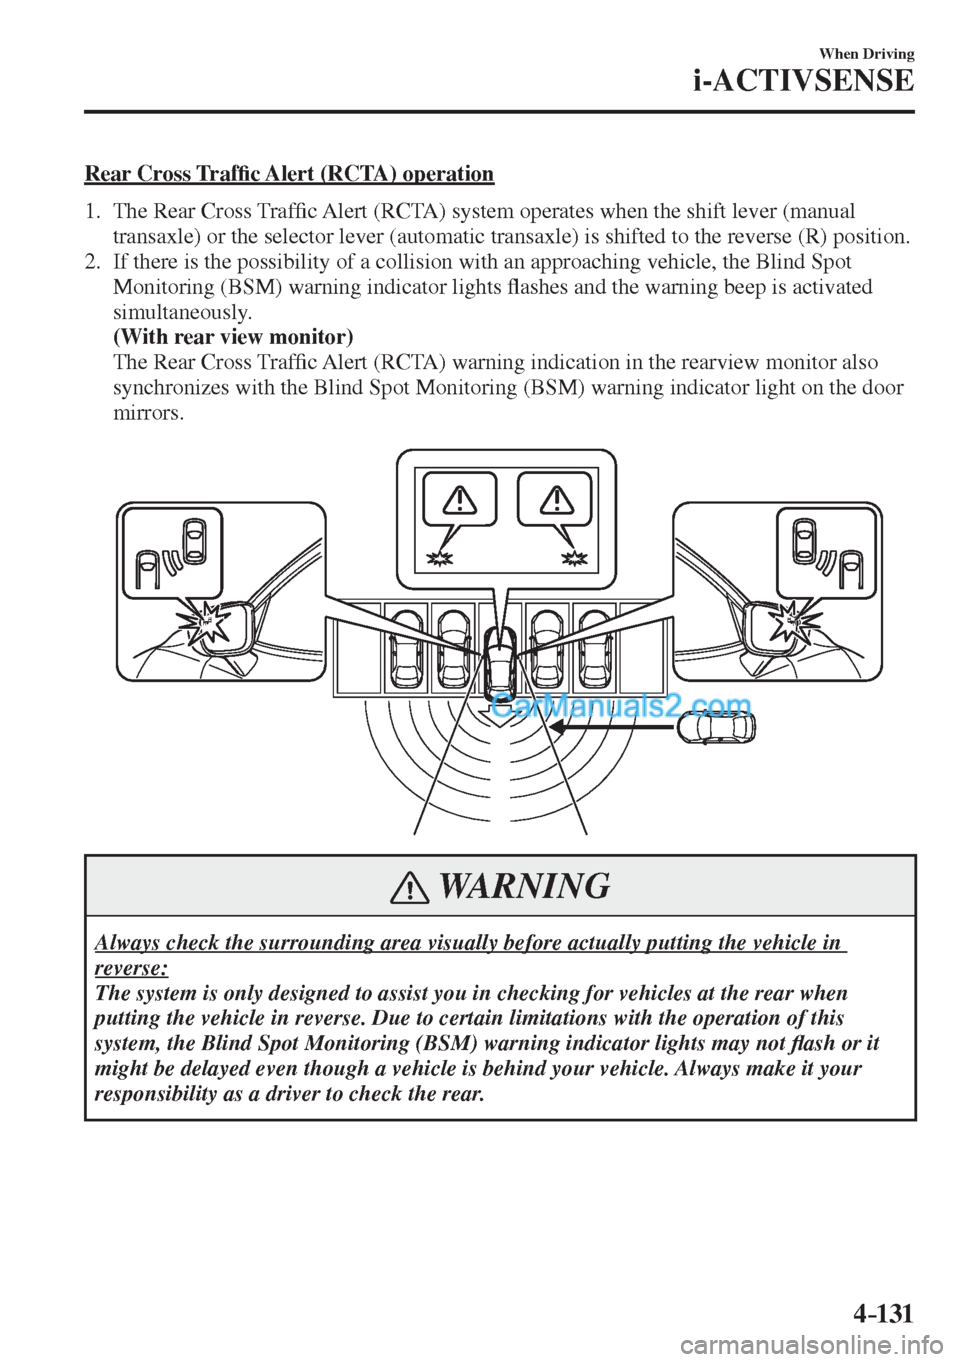 MAZDA MODEL 2 2017  Owners Manual (in English) 4–131
When Driving
i-ACTIVSENSE
  Rear  Cross  Traf�¿ c Alert (RCTA) operation
     1.   The  Rear  Cross  Traf�¿ c Alert (RCTA) system operates when the shift lever (manual 
transaxle) or the sel